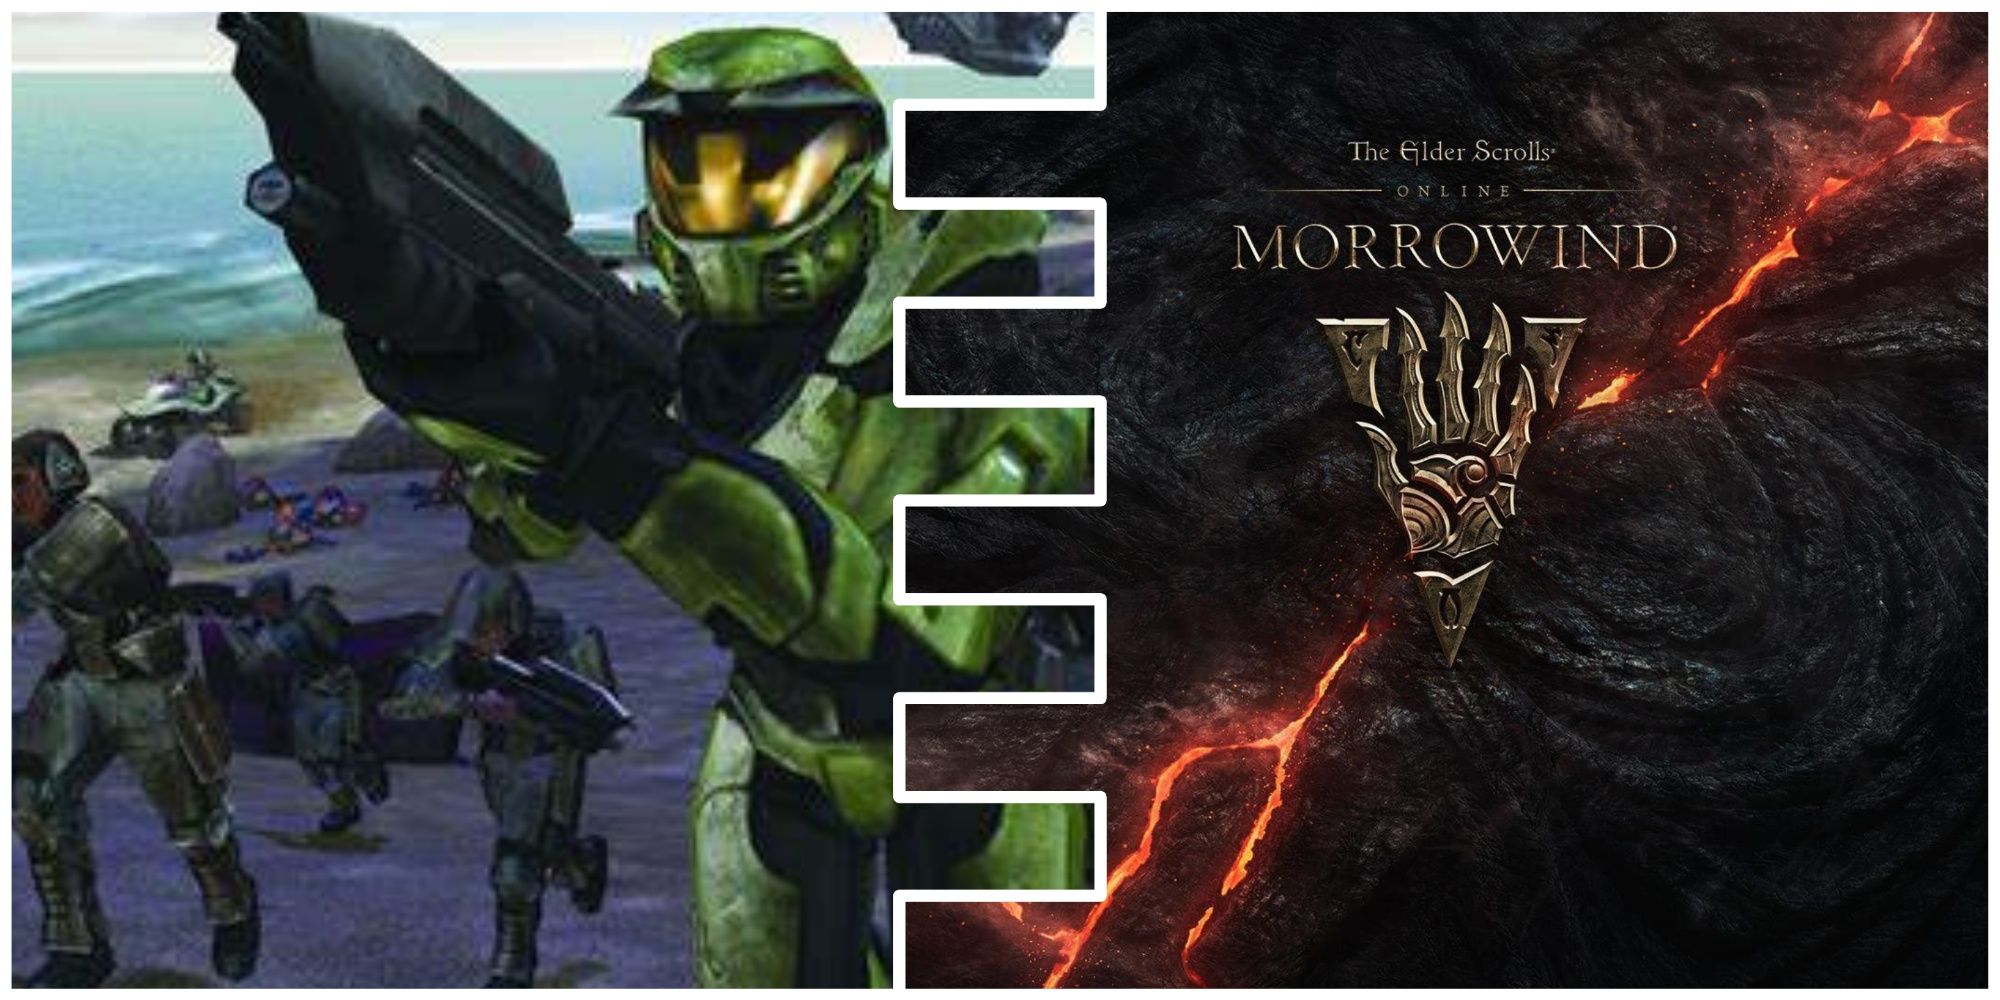 Halo Combat Evolved and Morrowind Online